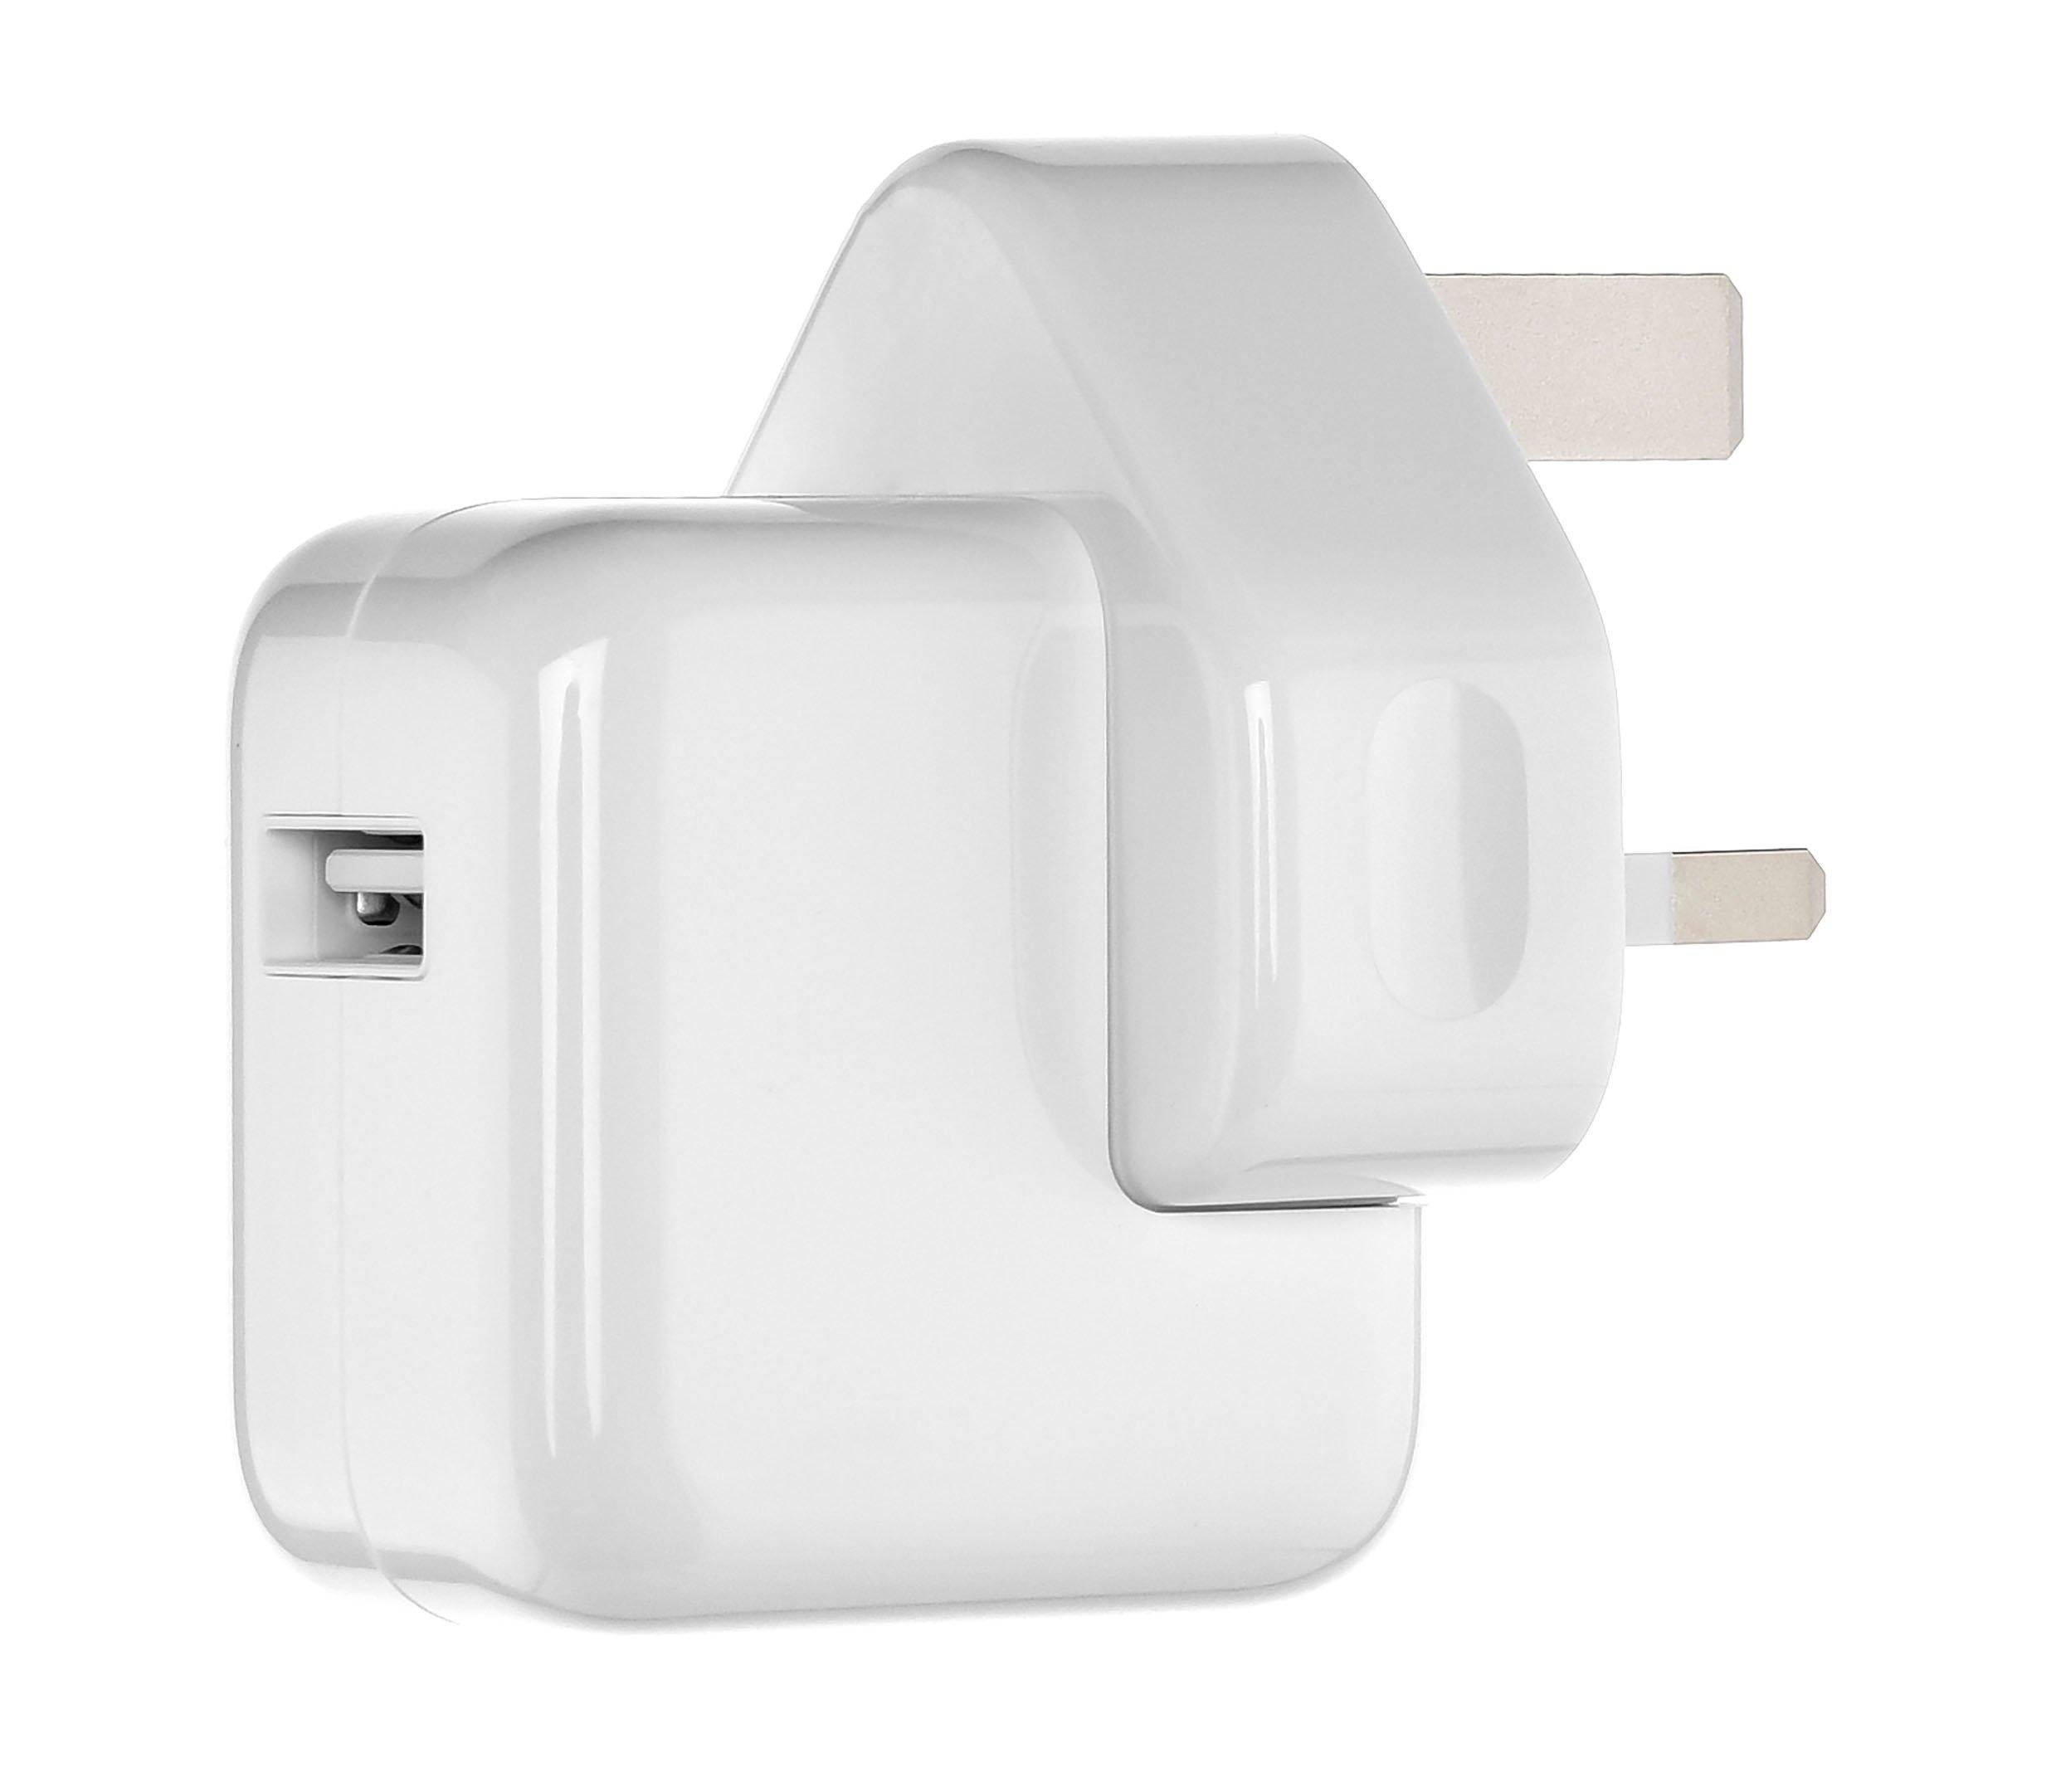 Apple 12W USB Power Adapter, White - eXtra